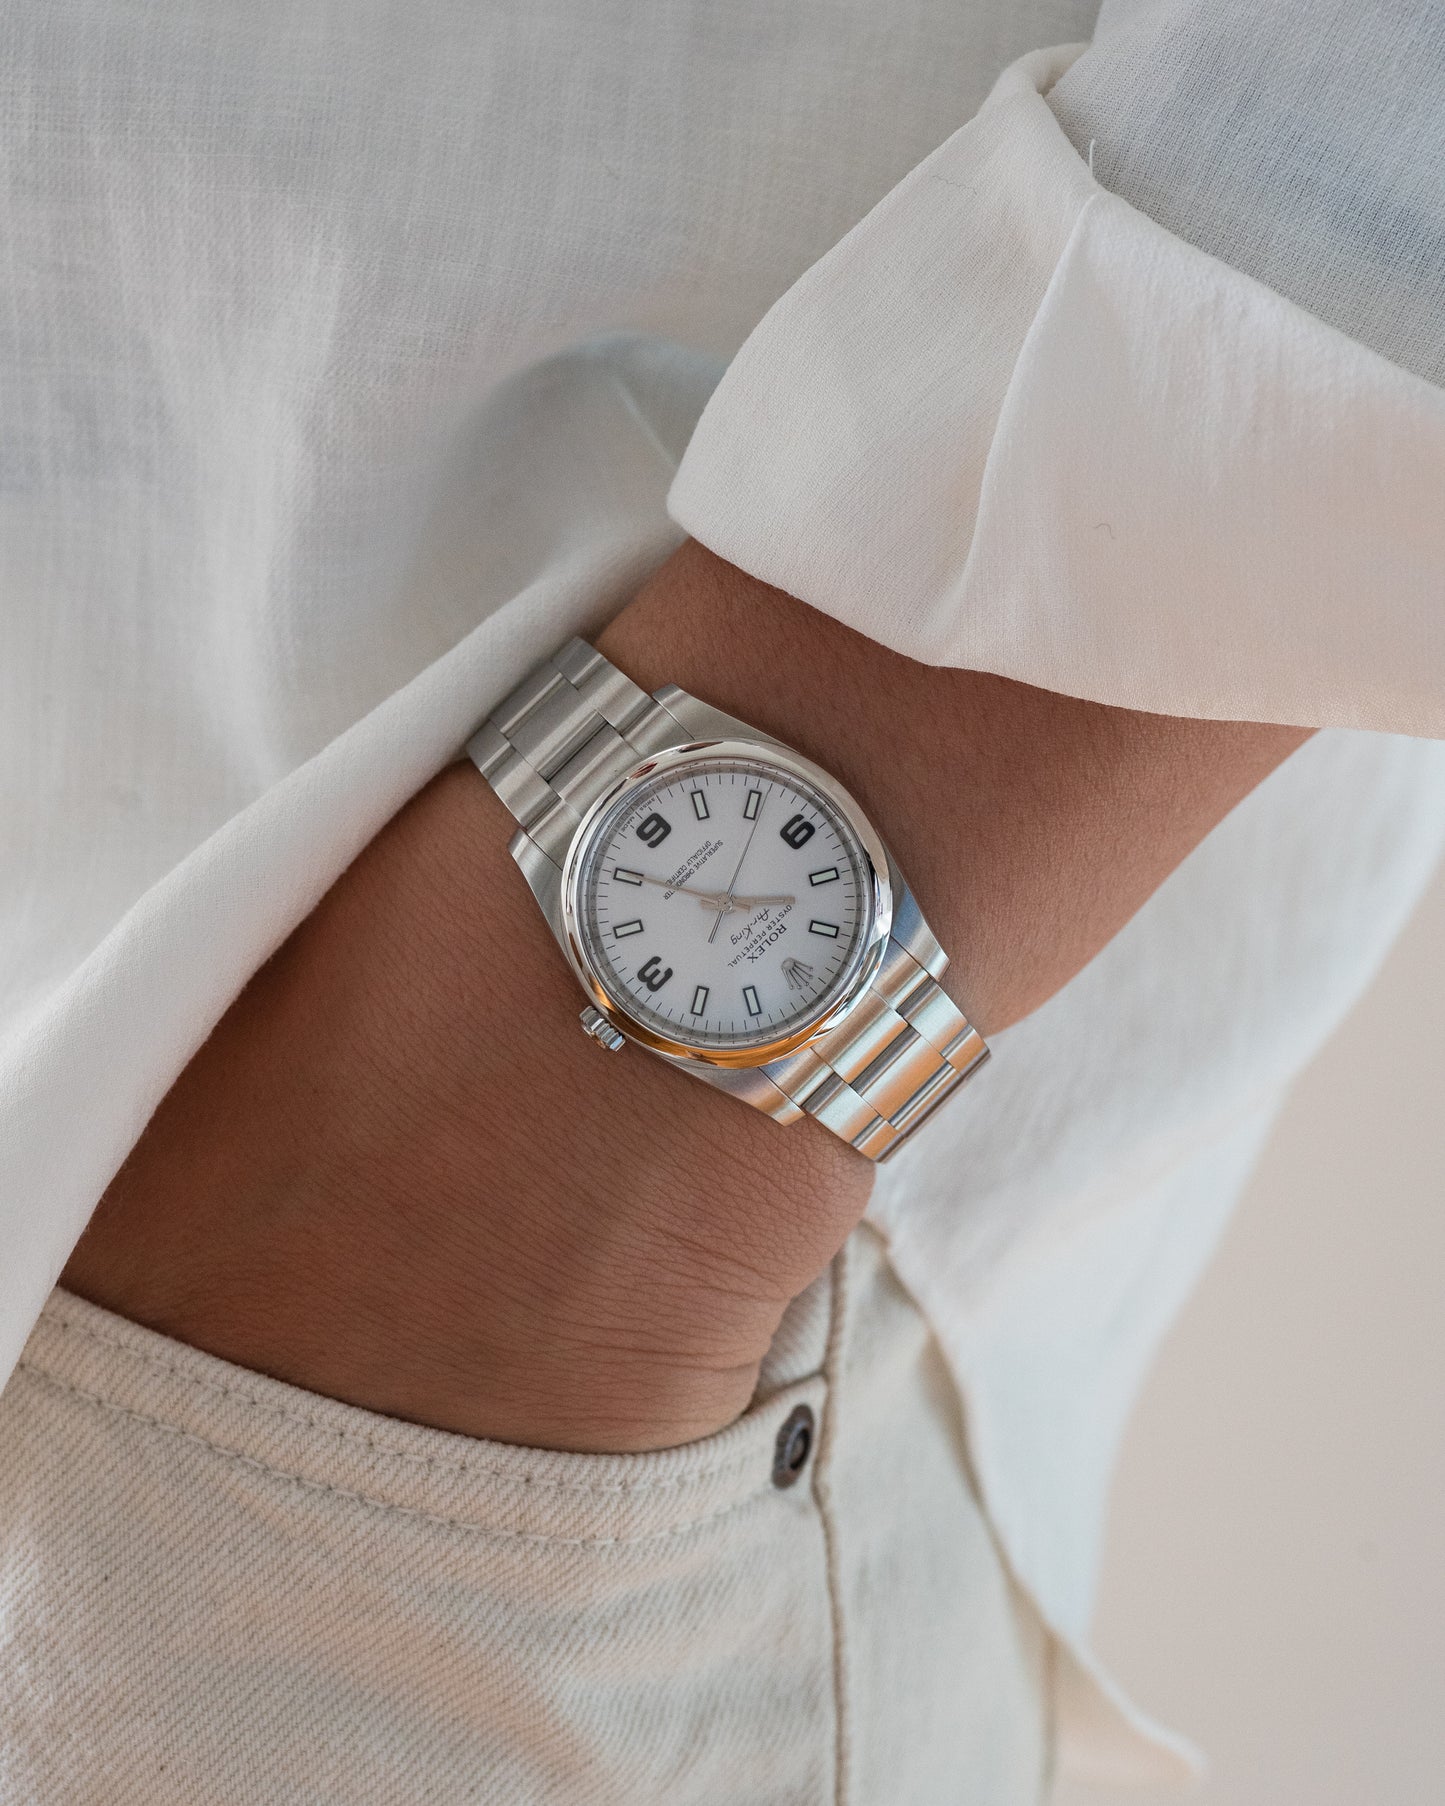 Rolex Air King White Dial 114200 from 2012